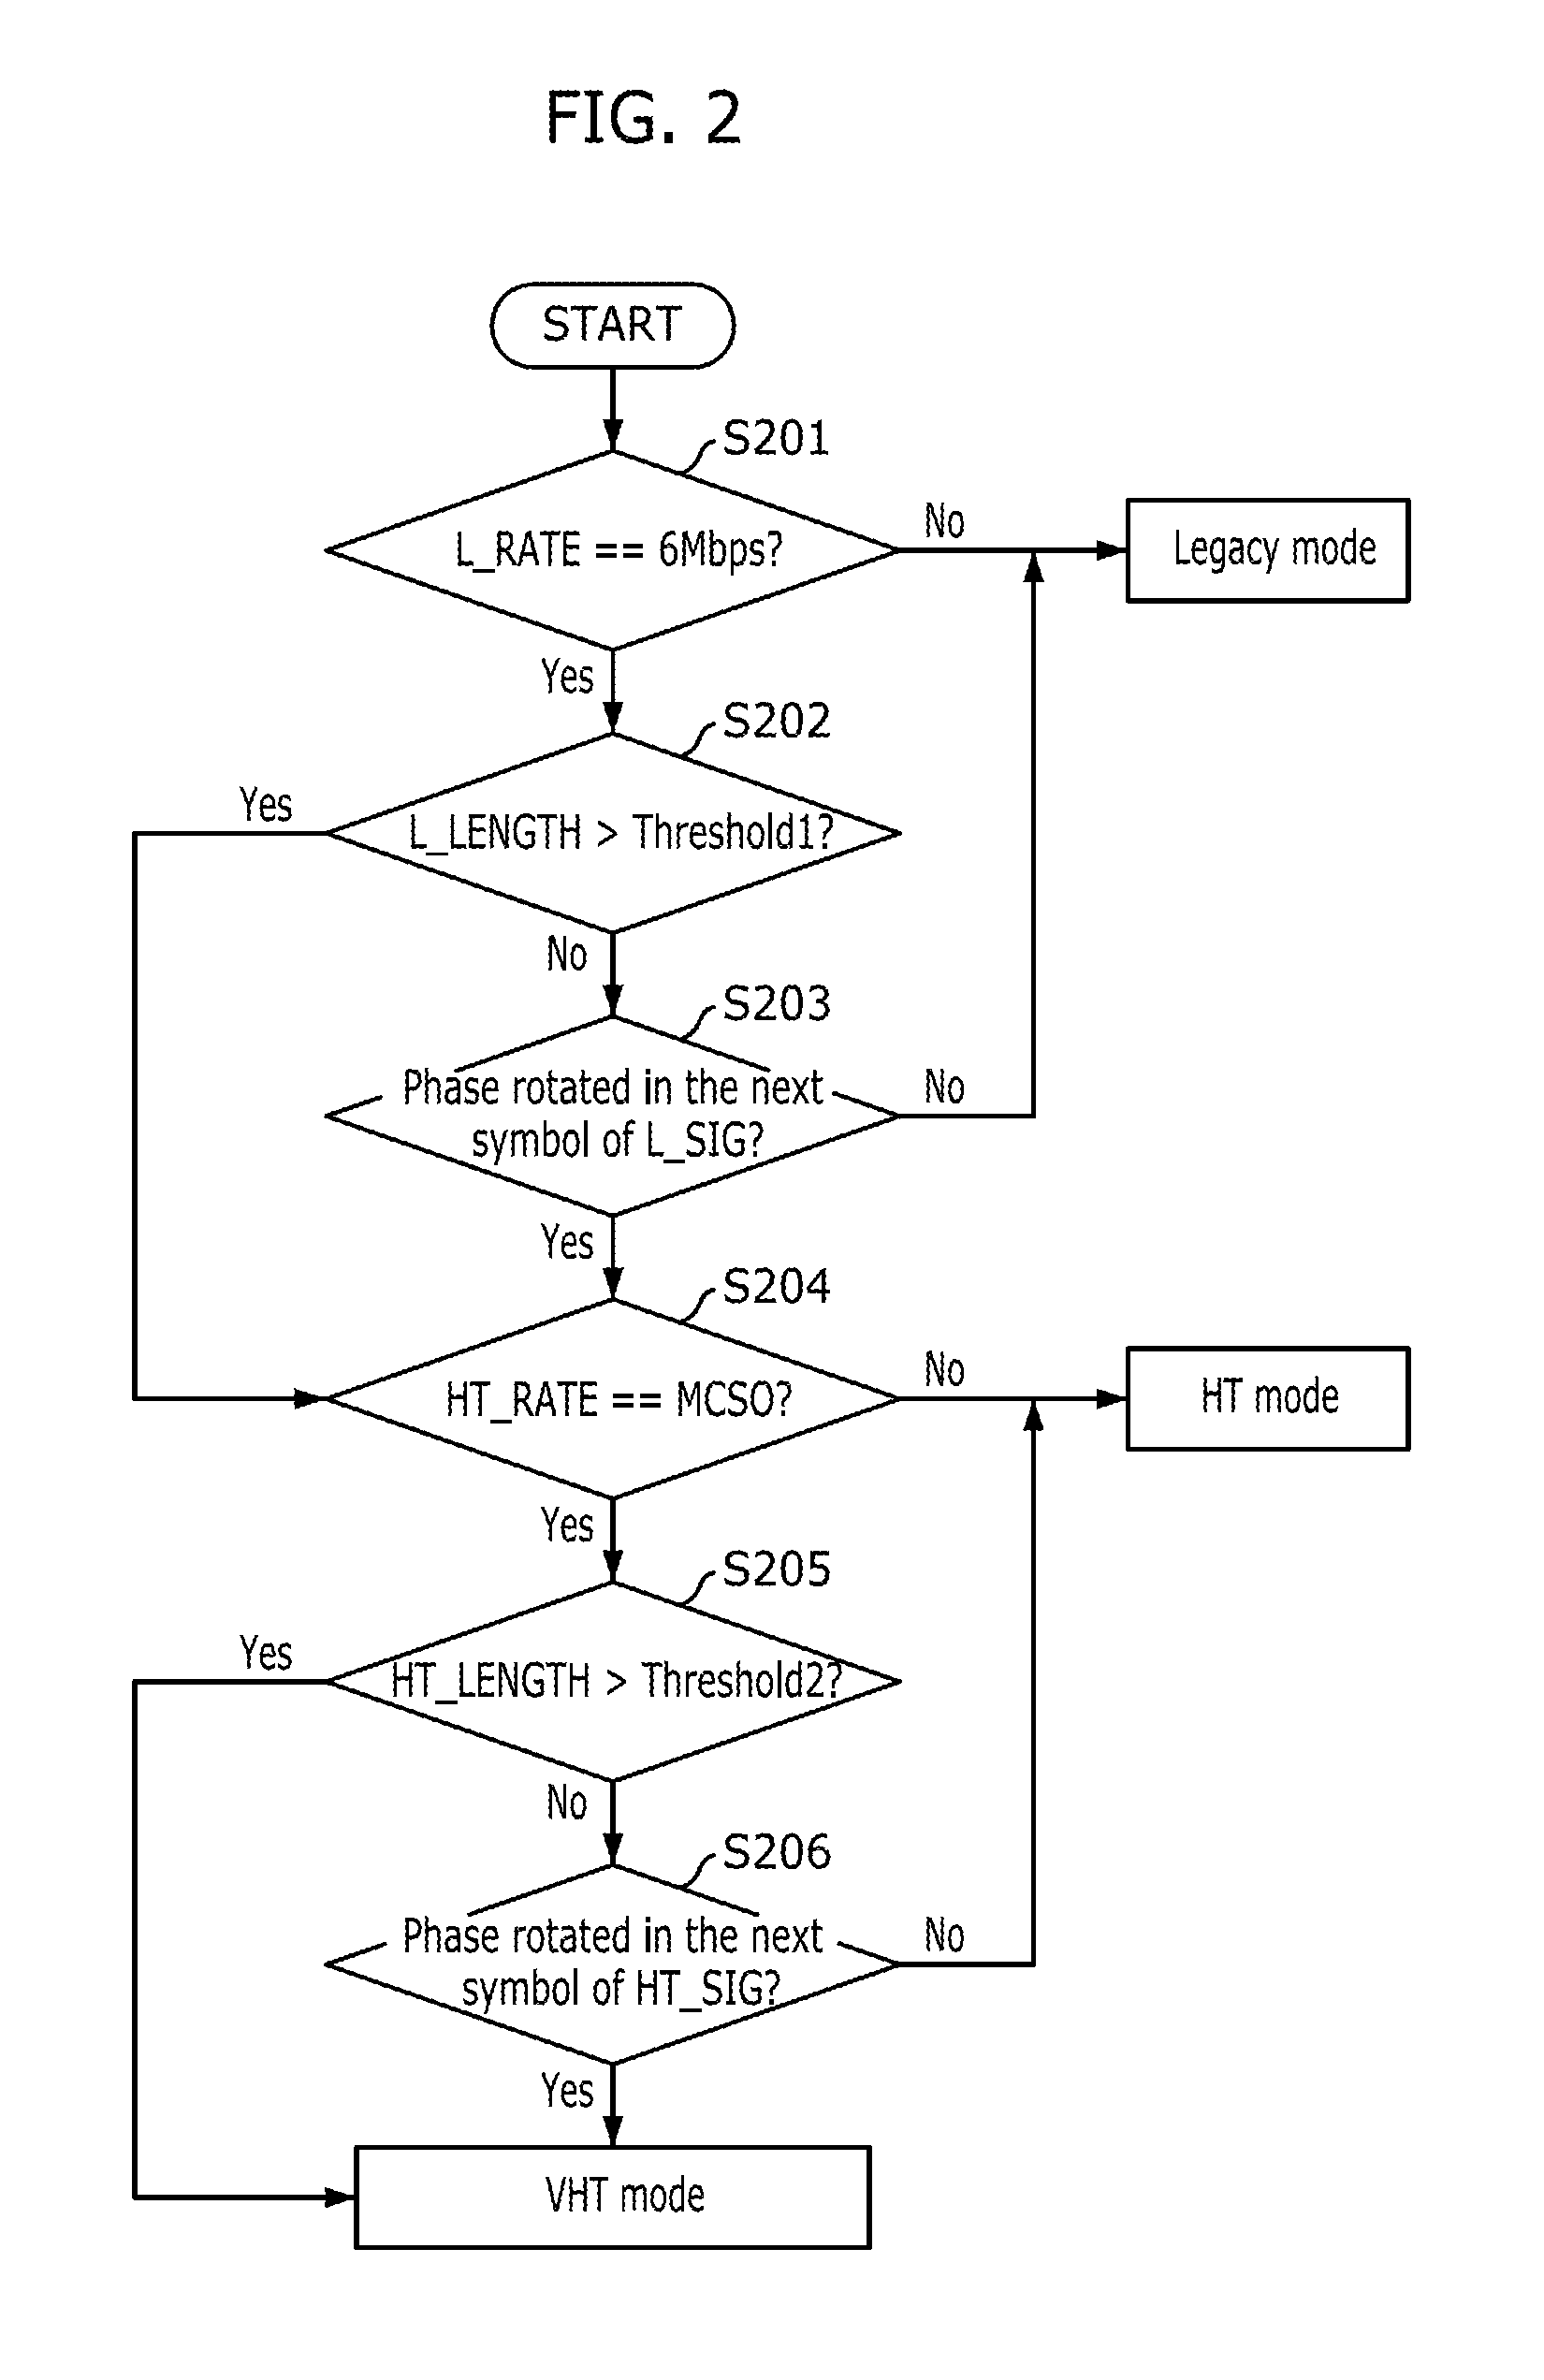 Packet mode auto-detection in multi-mode wireless communication system, signal field transmission for the packet mode auto-detection, and gain control based on the packet mode